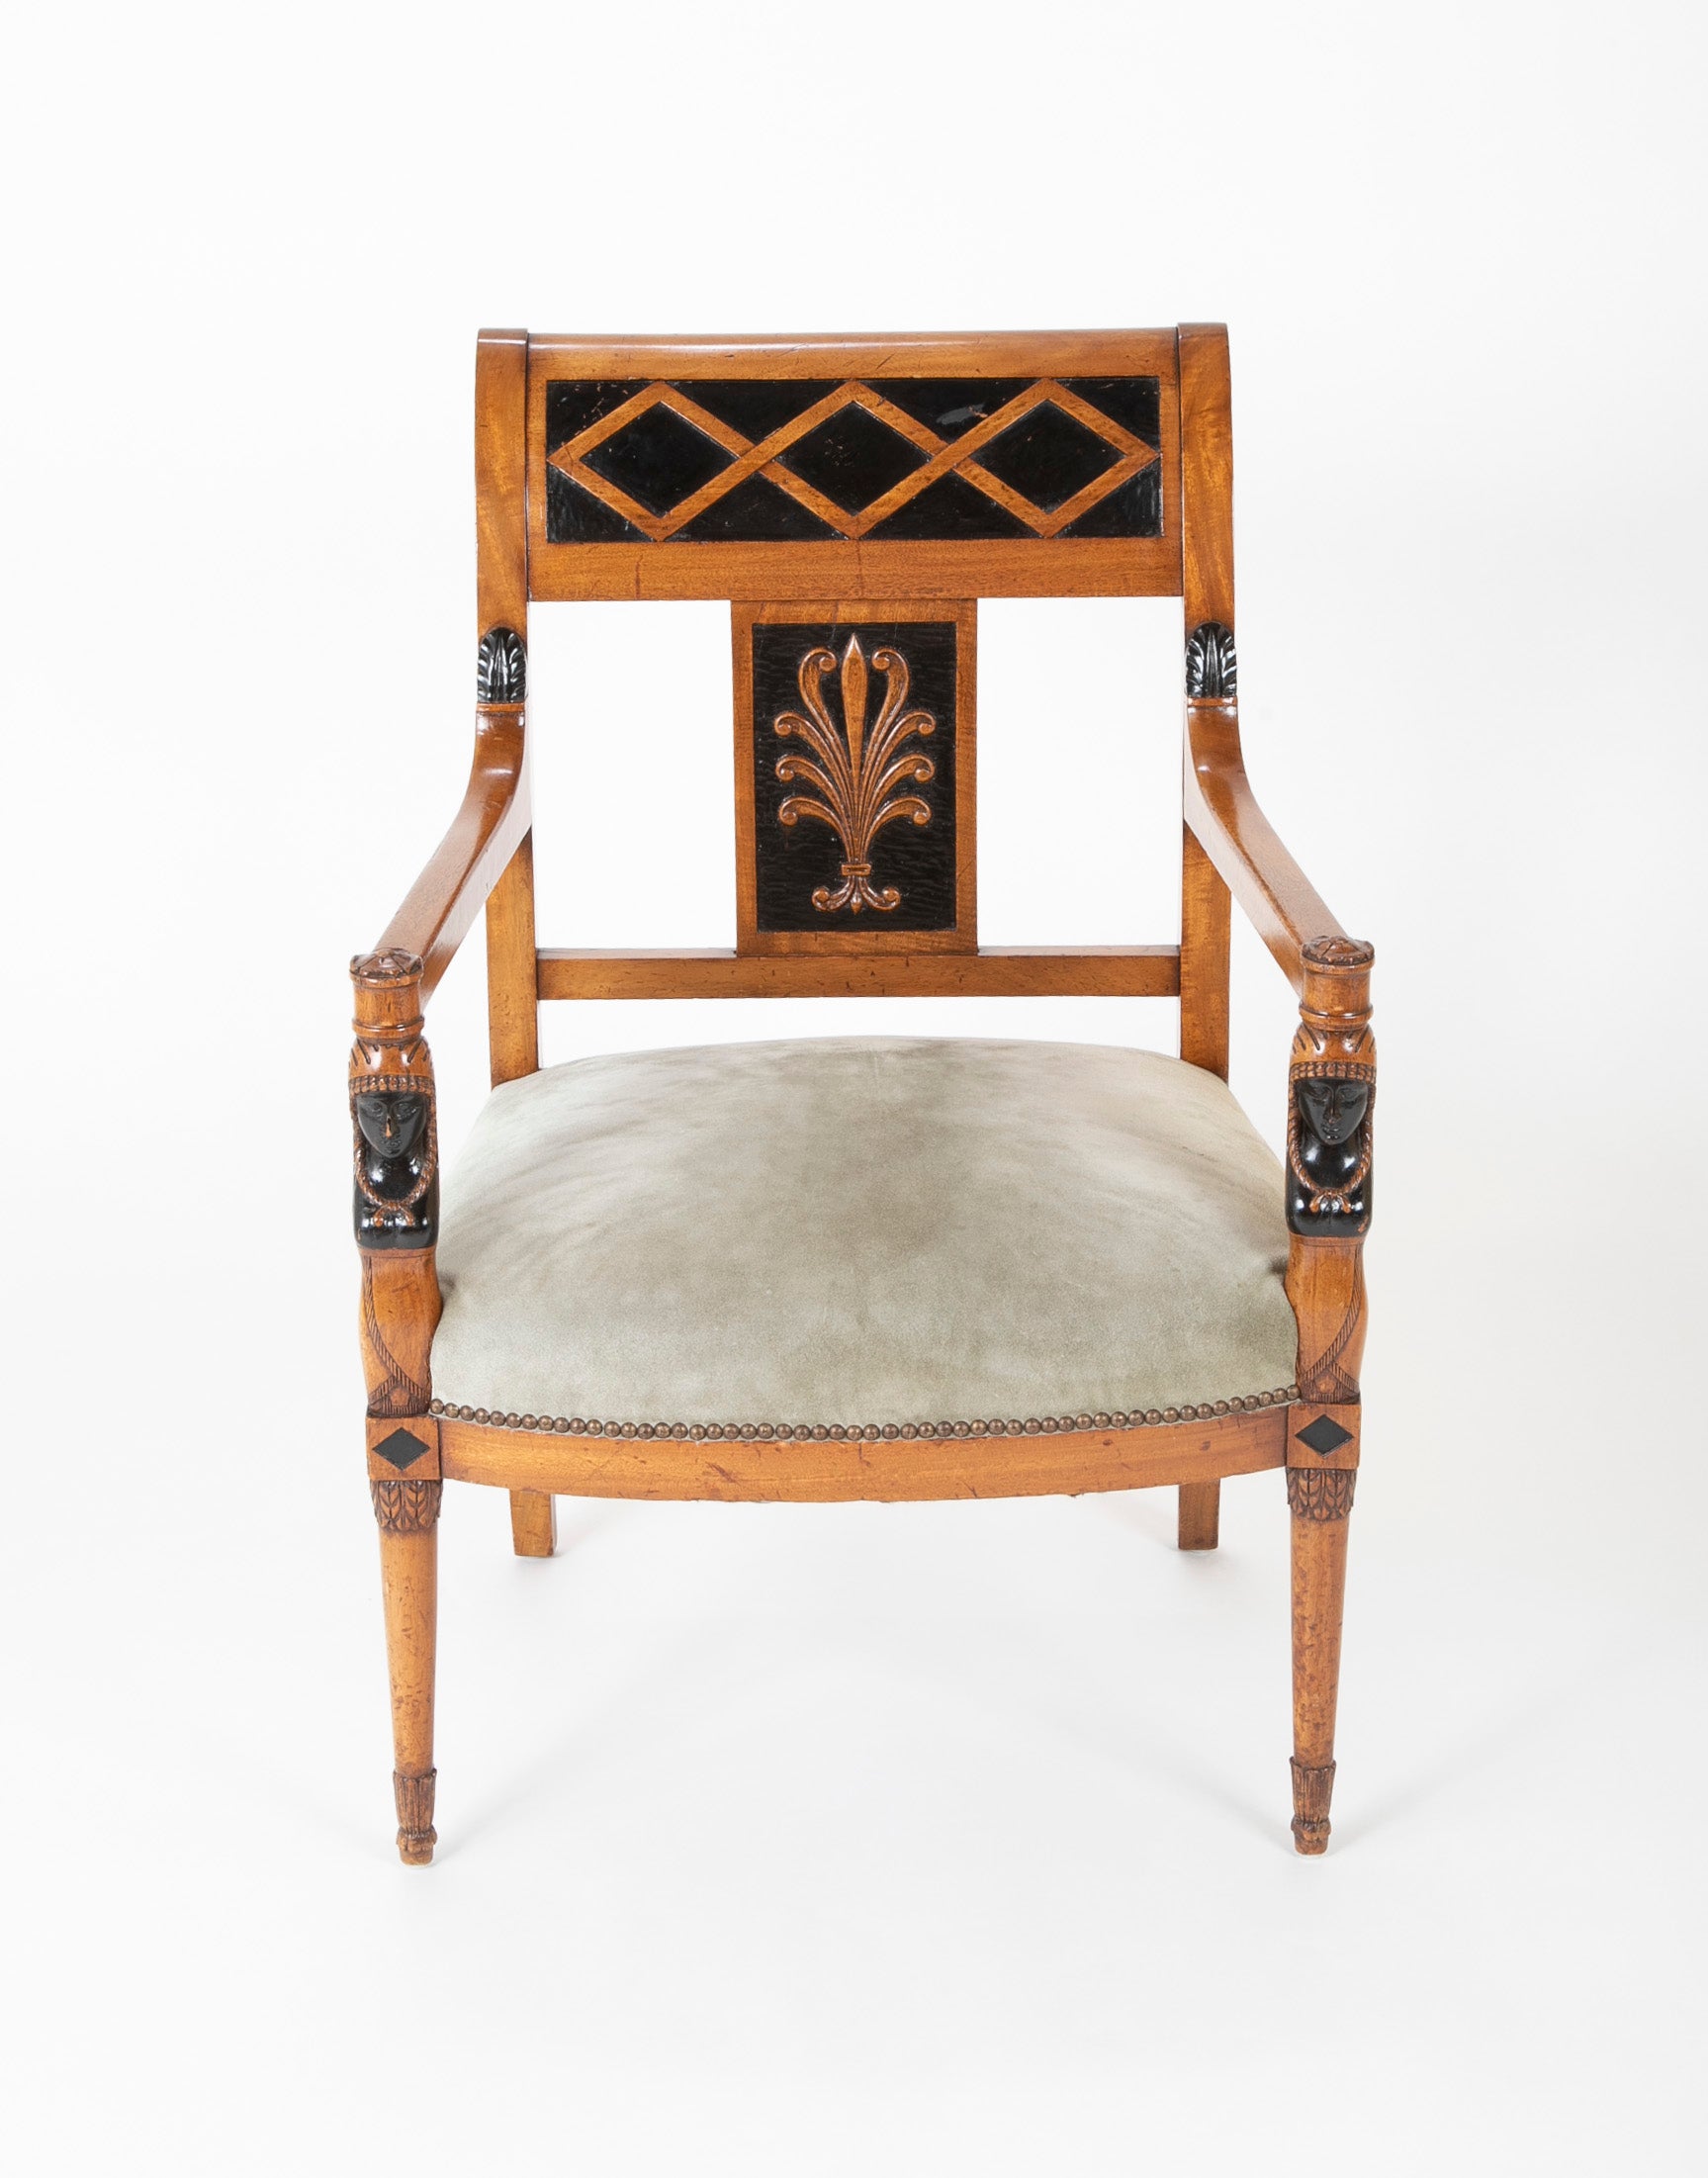 A Pair of Continental Neoclassical Chairs with Carved Egyptian Head on the Arm